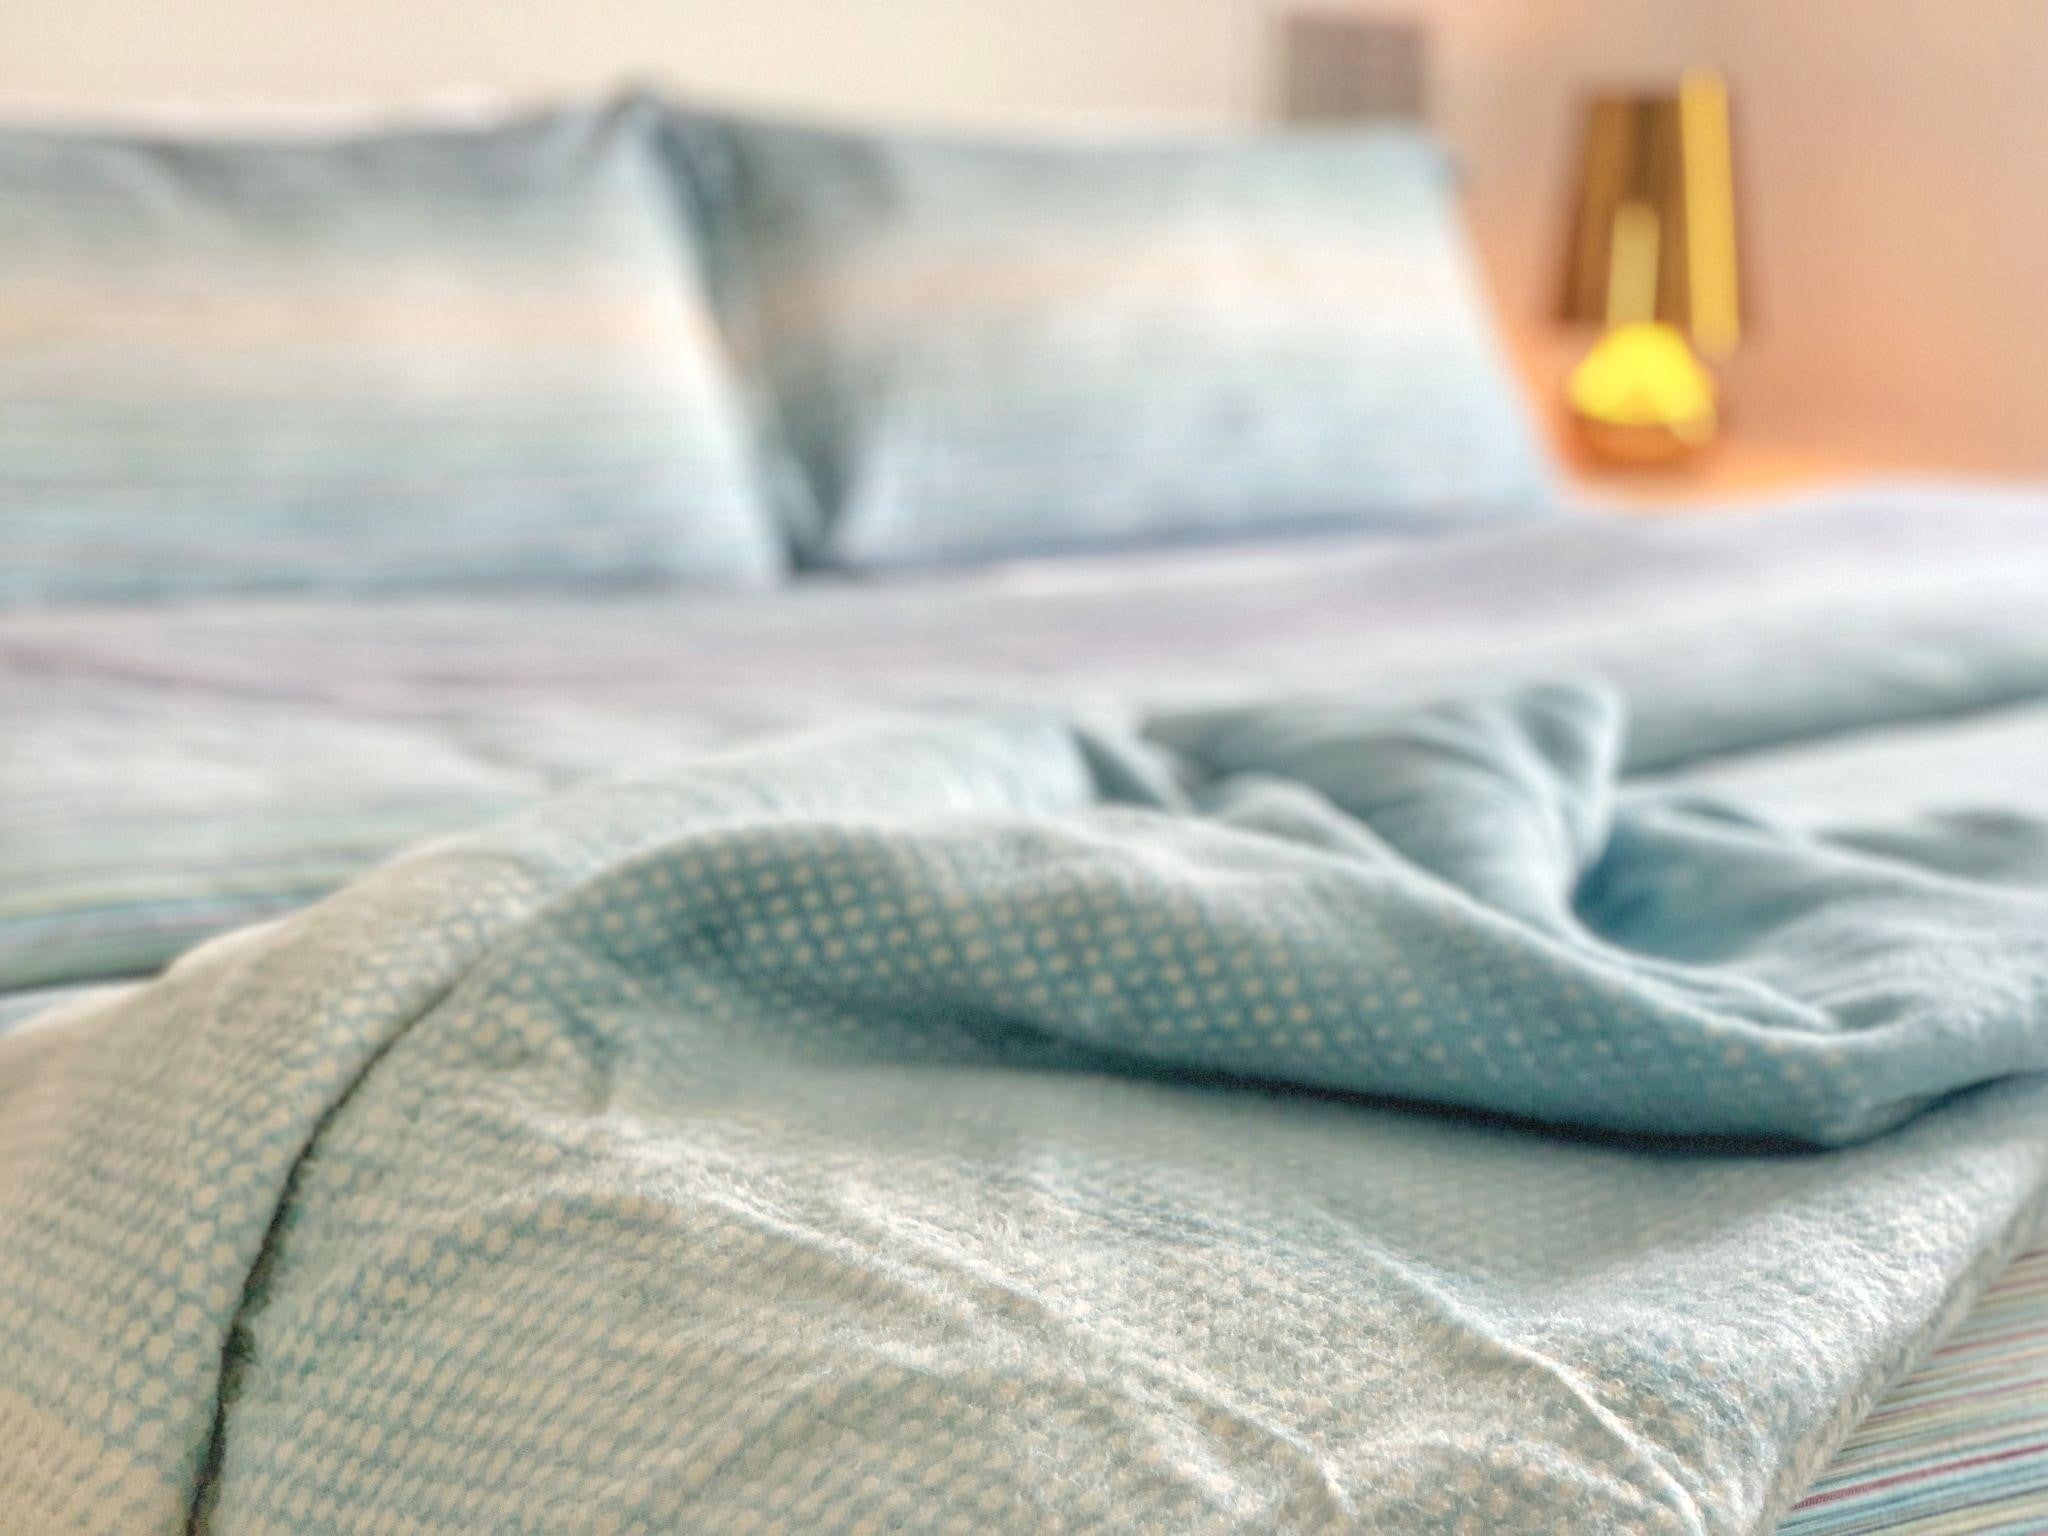 12 Ways to Style: How to Put a Throw Blanket on a Bed